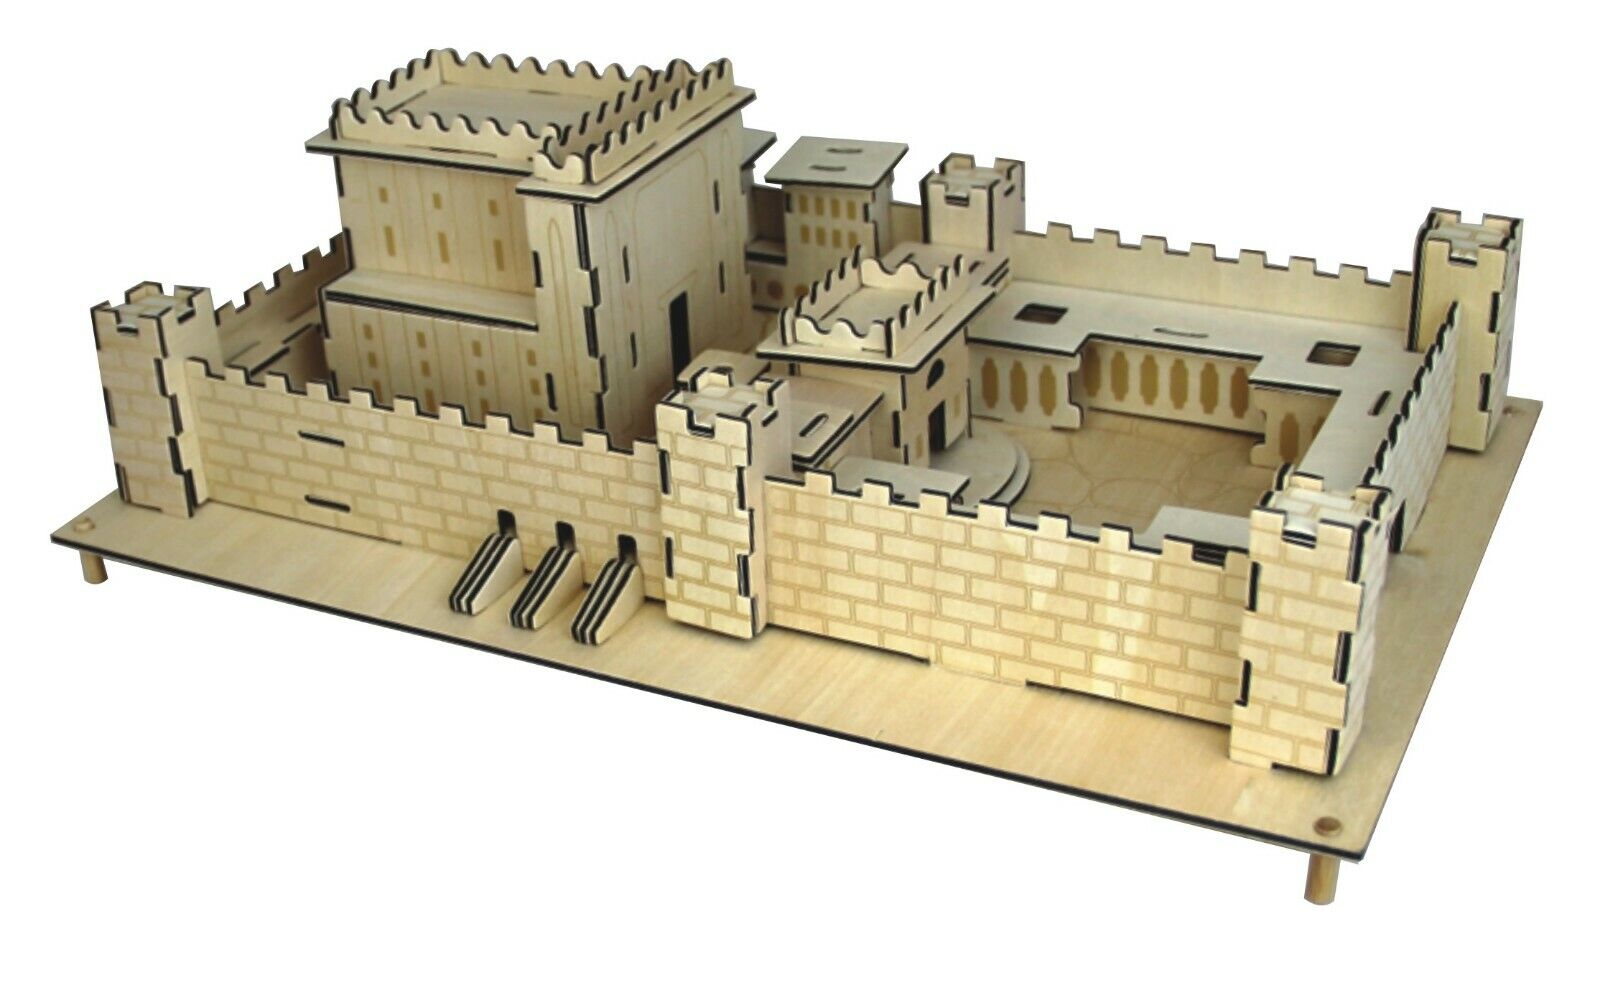 THE SECOND TEMPLE- DIY Wood 3D Puzzle Self Assembly Model Made in the Holy Land